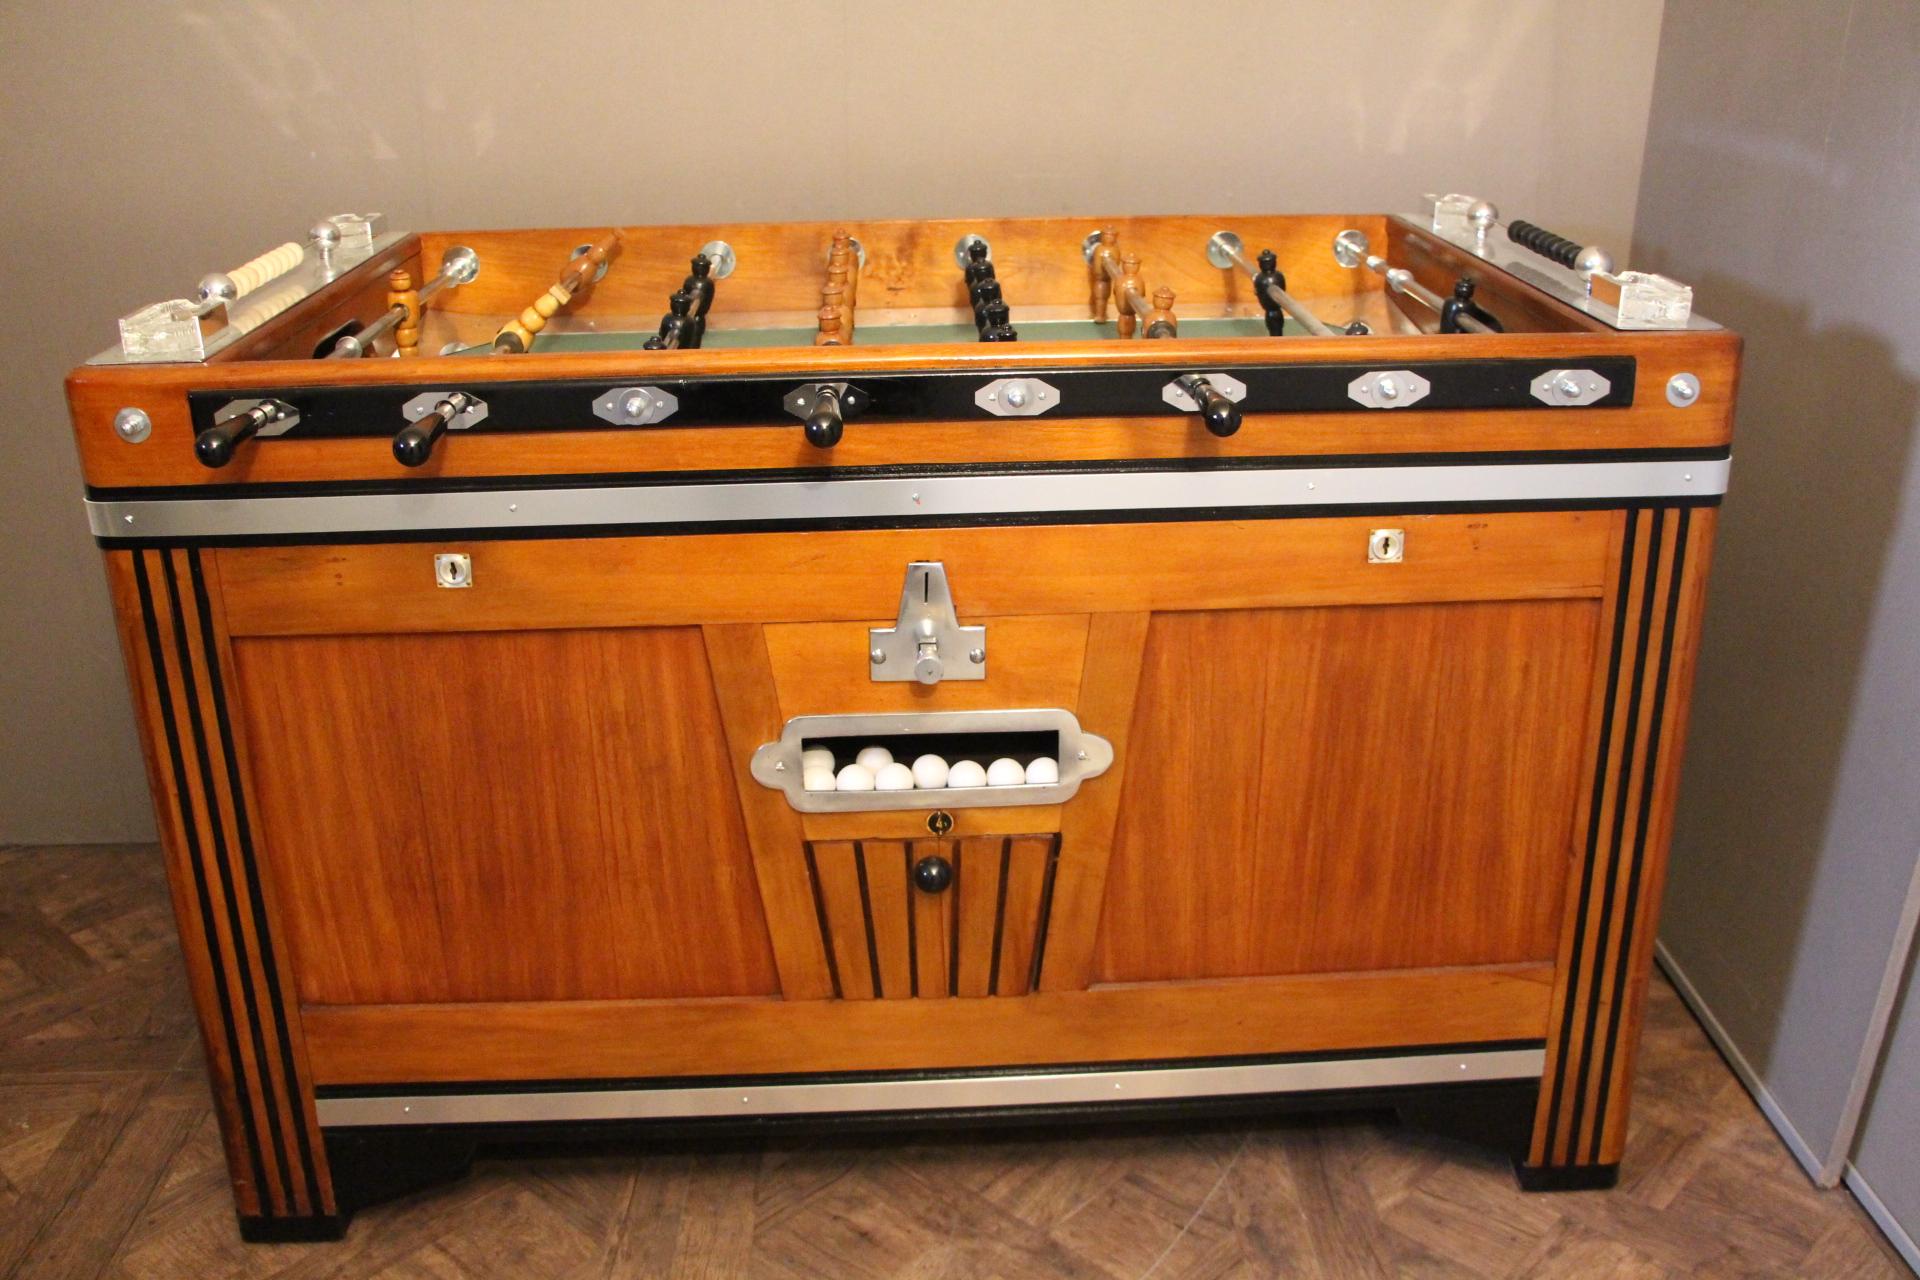 Unusual shape of French foosball table, this item is spectacular. It is in light color wood and blackened wood and features many aluminum pieces. Nice job of inlay on its sides.
Its players are in black and honey color carved wood.
Green field and